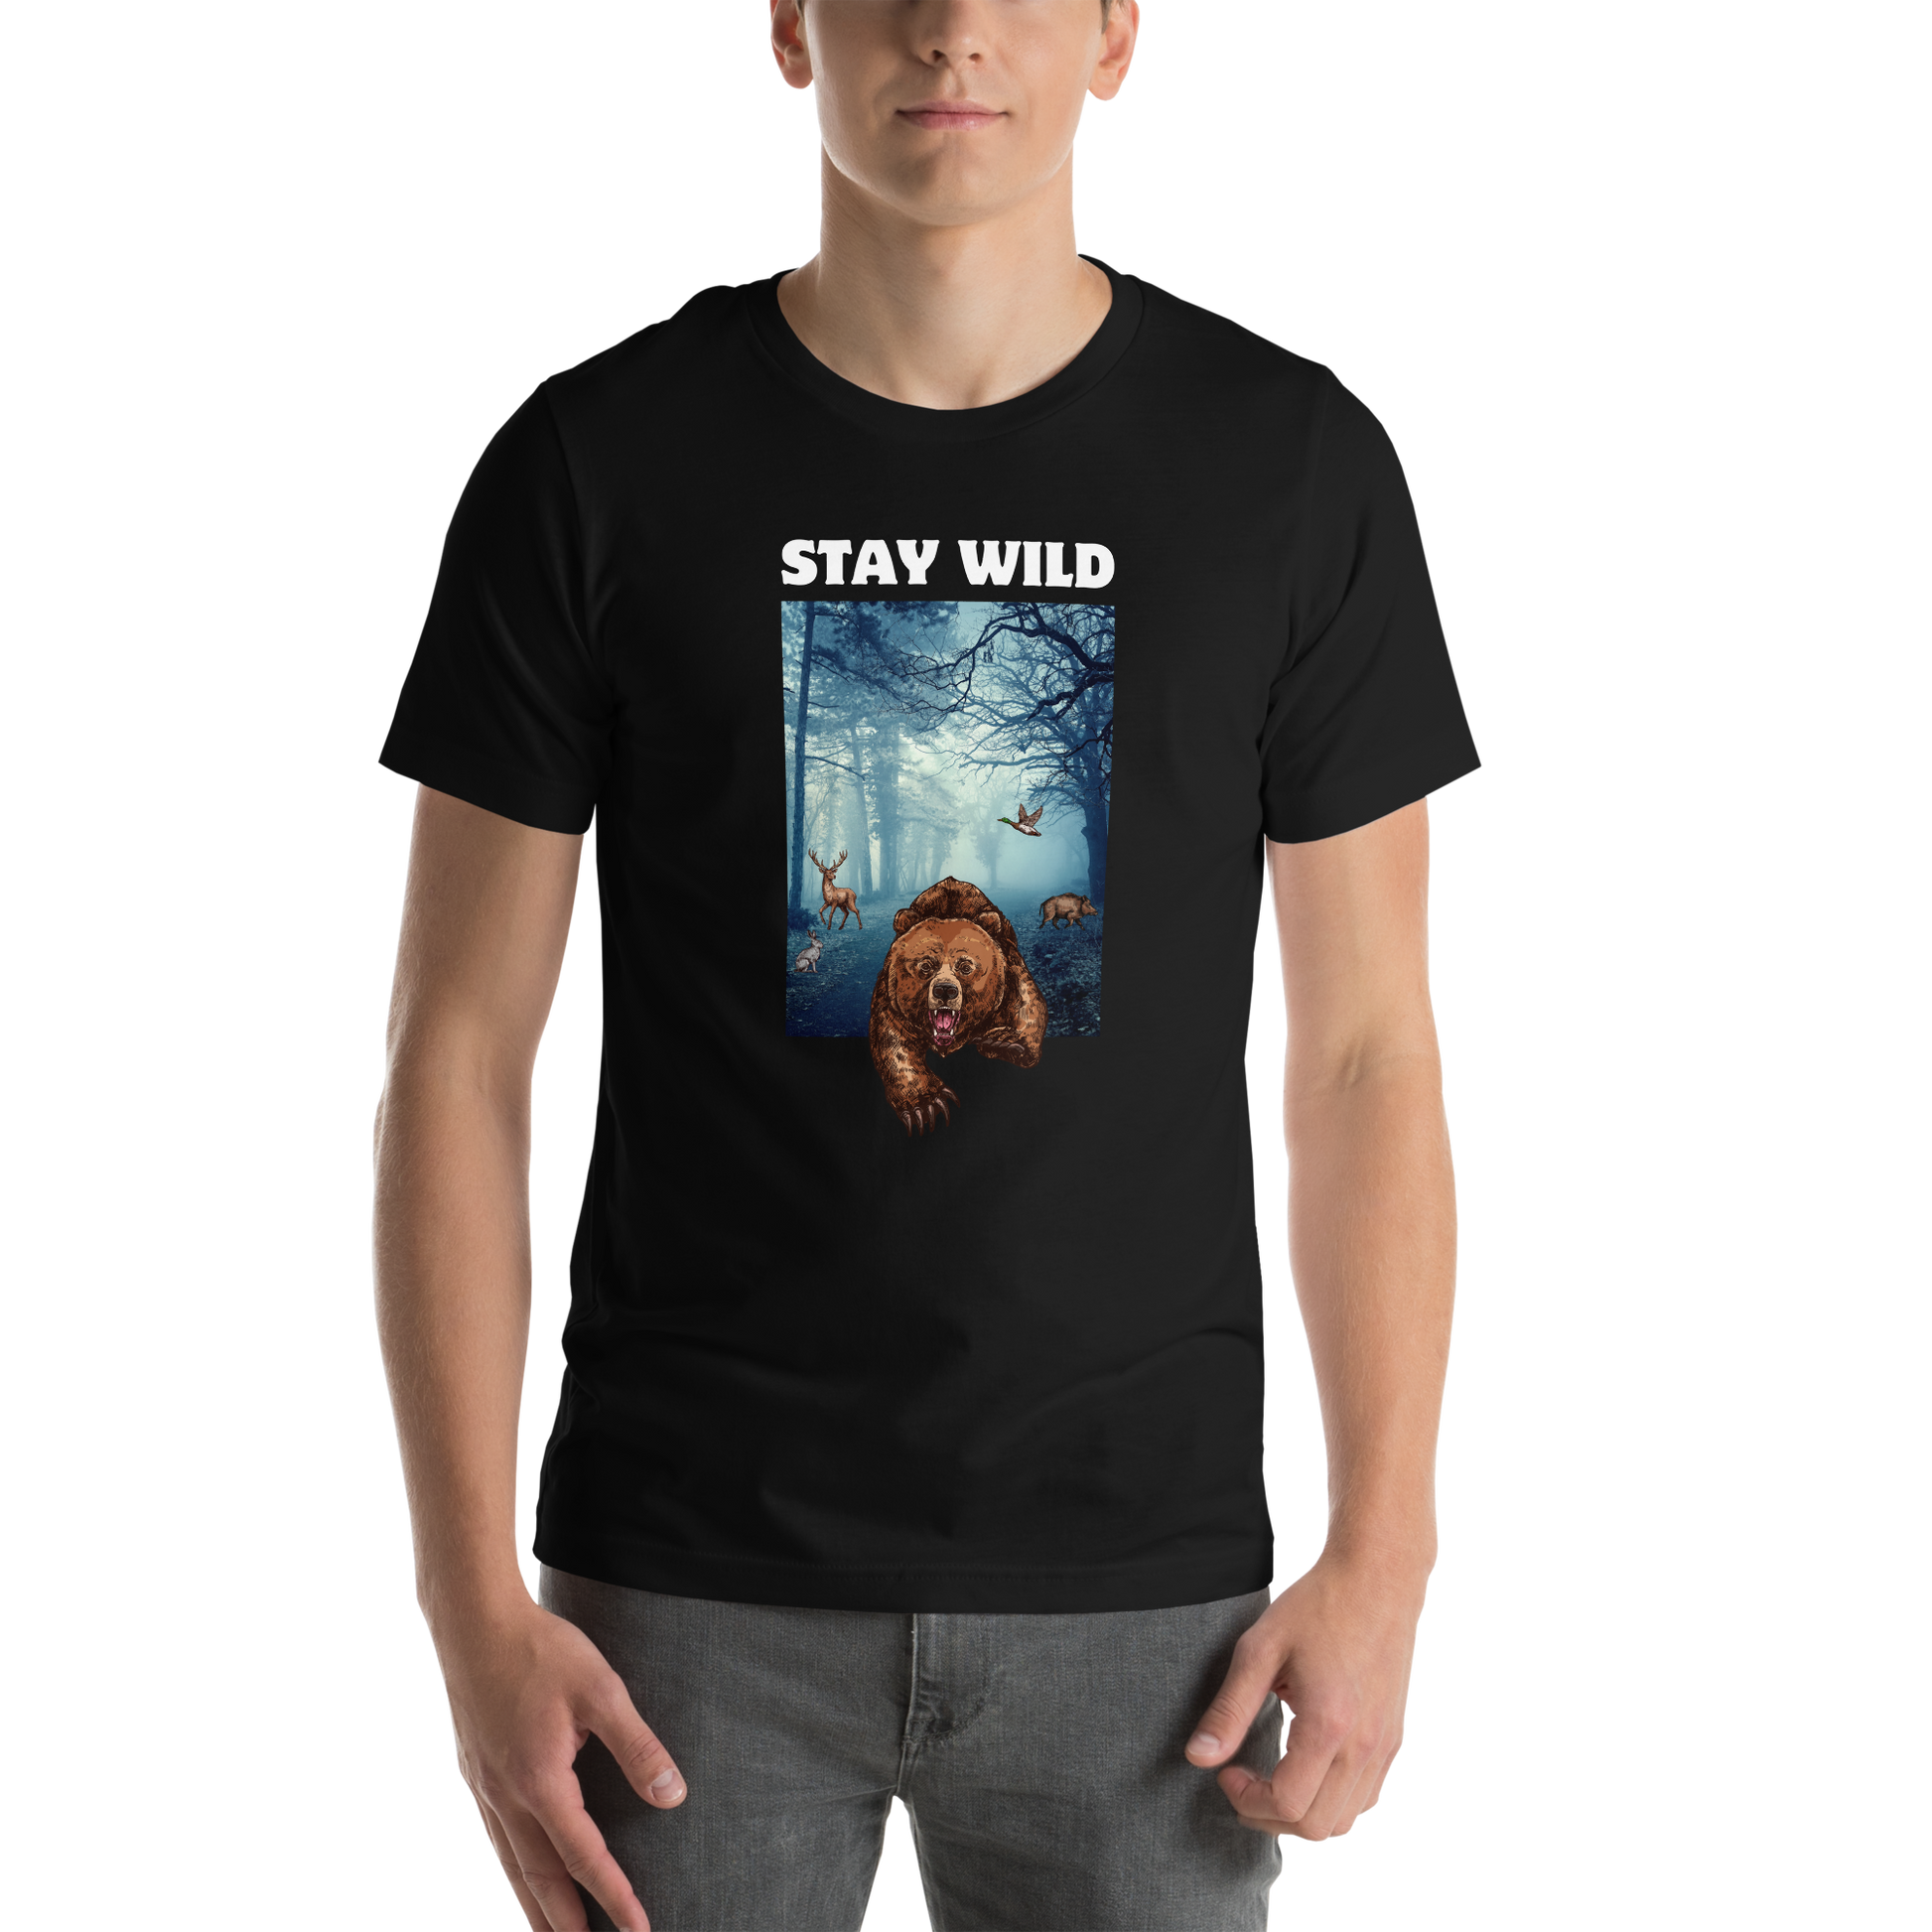 Man wearing a Black Premium Bear Tee featuring a Stay Wild graphic on the chest - Cool Graphic Bear Tees - Boozy Fox